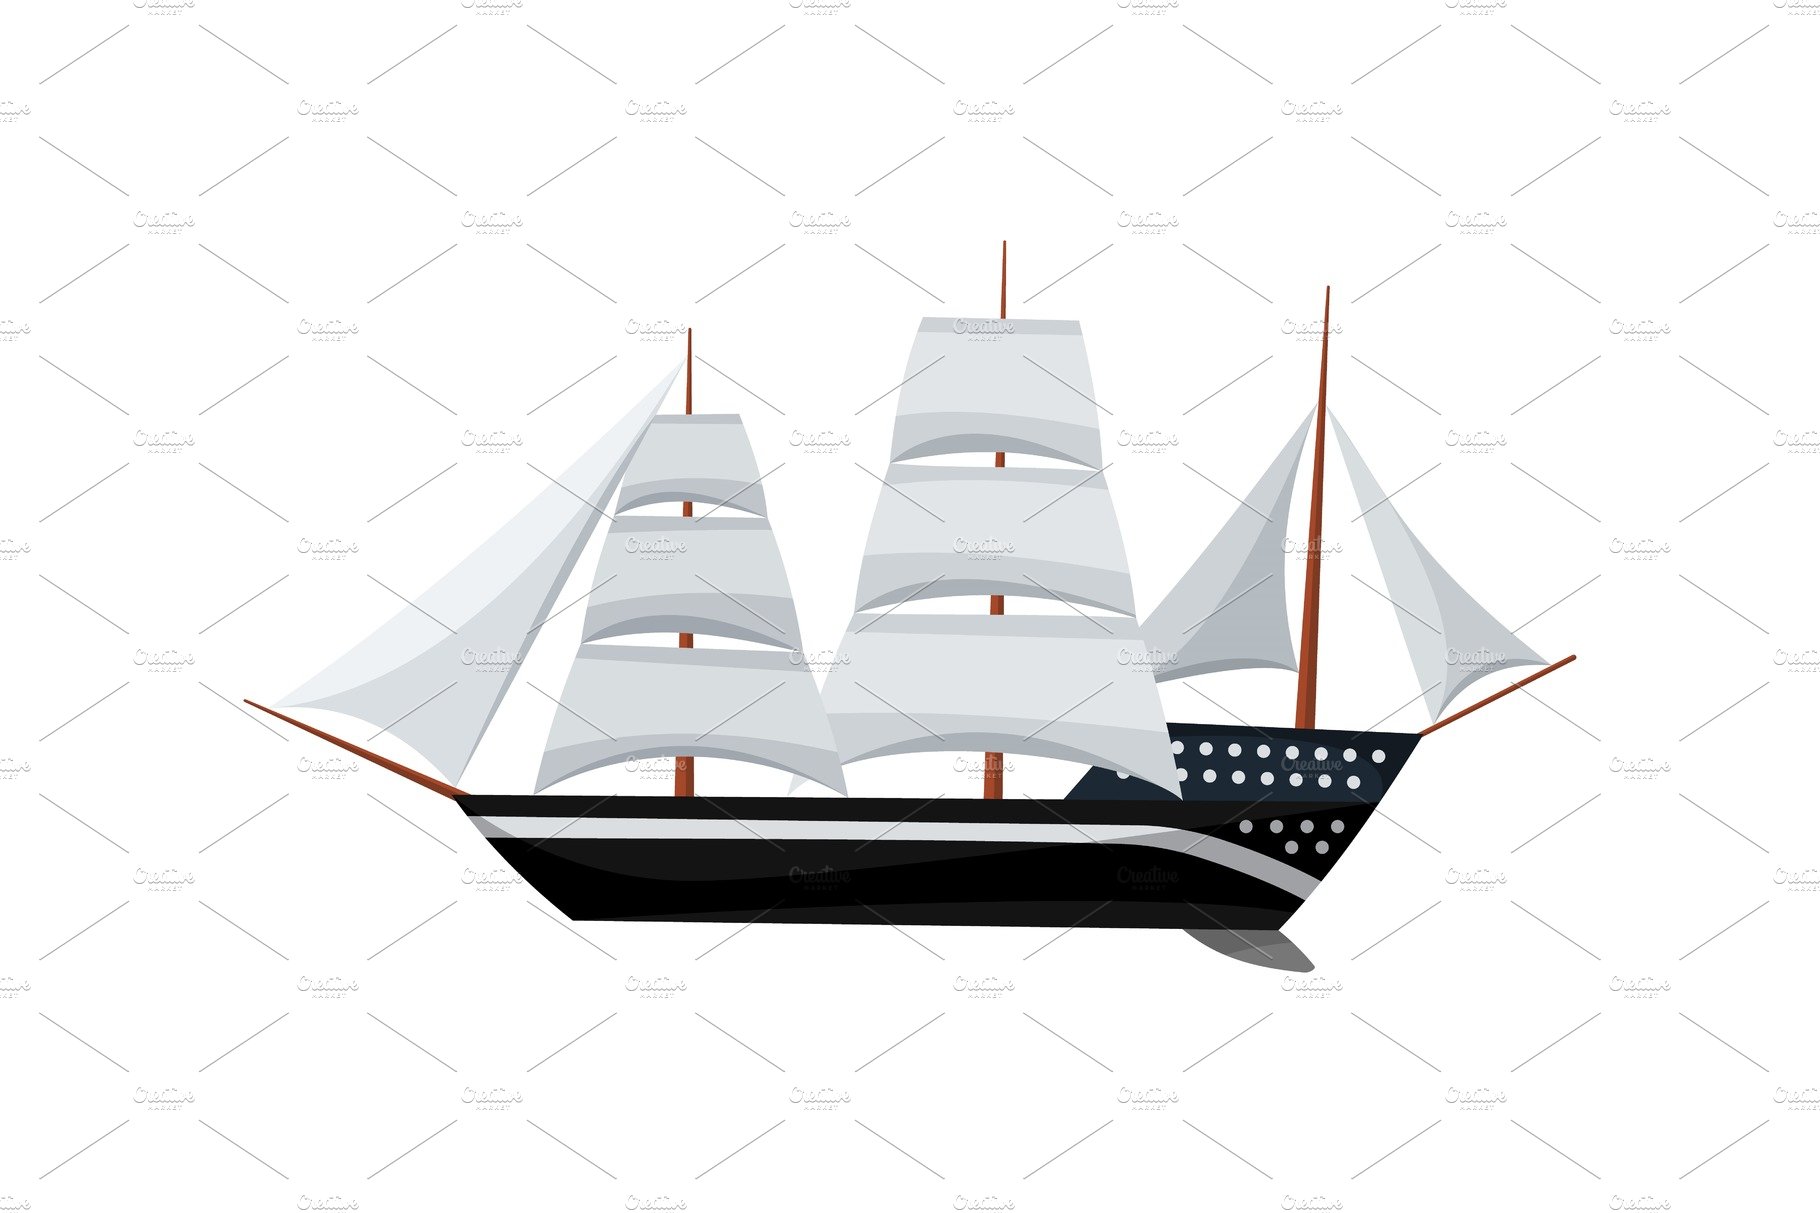 Yacht or sail boat marine. Cruise cover image.